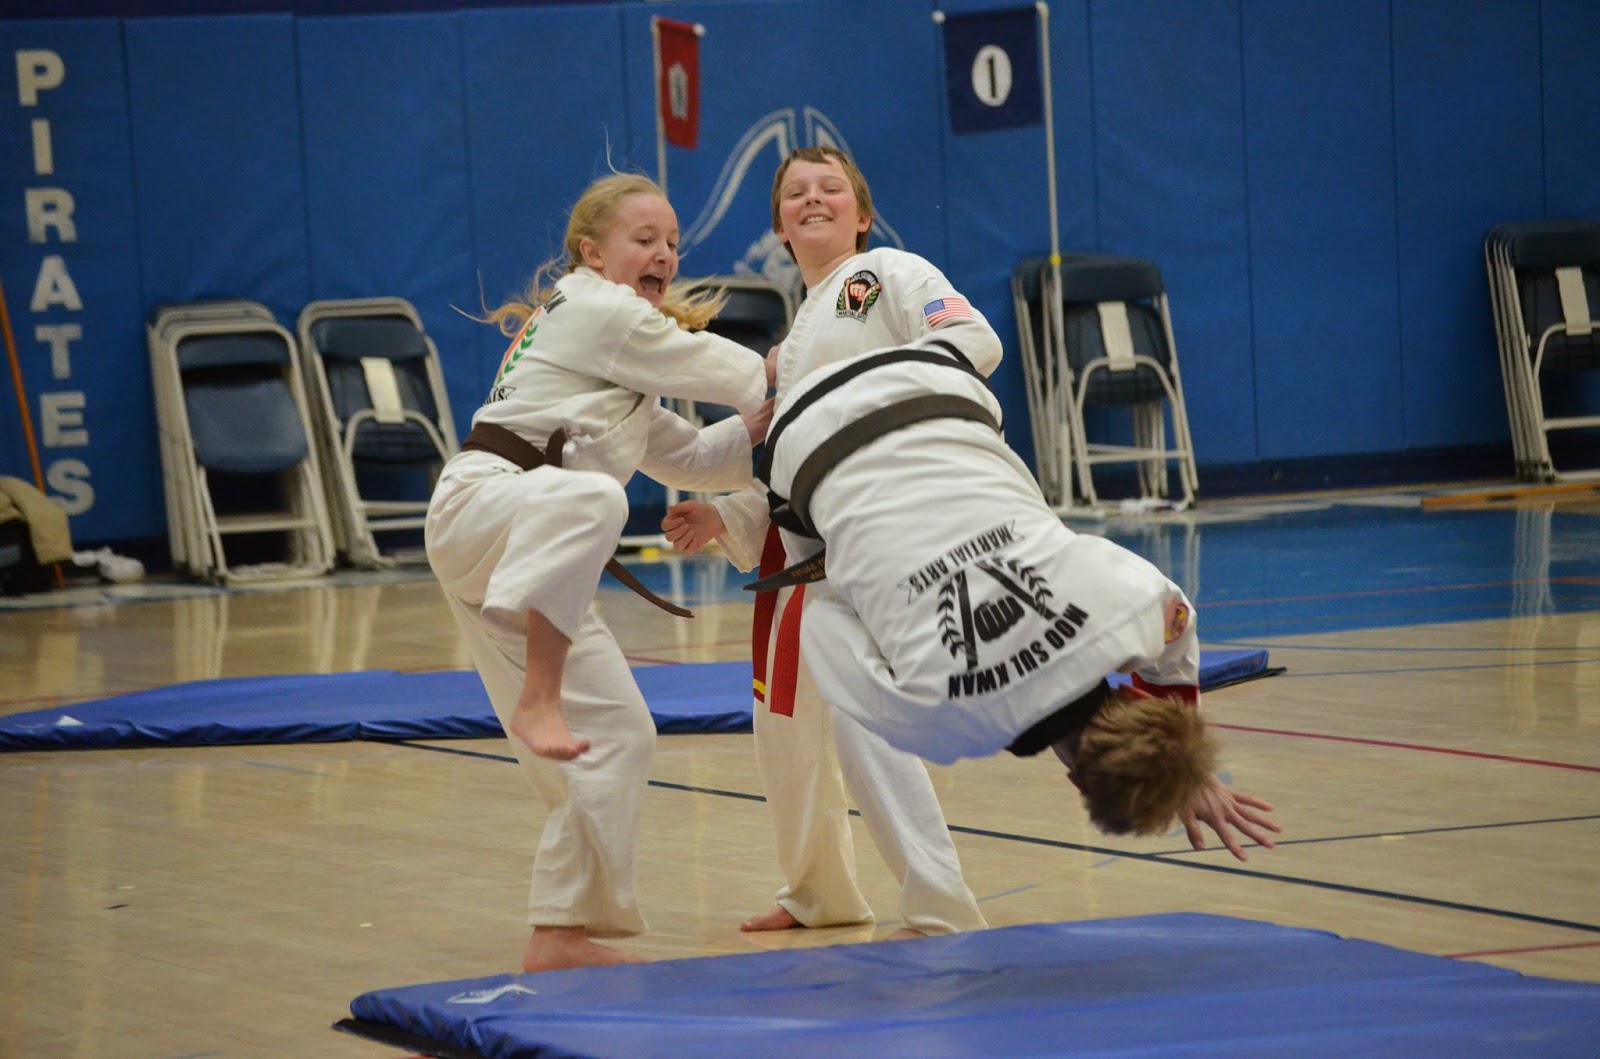 Martial arts children defending themselves with self-defense